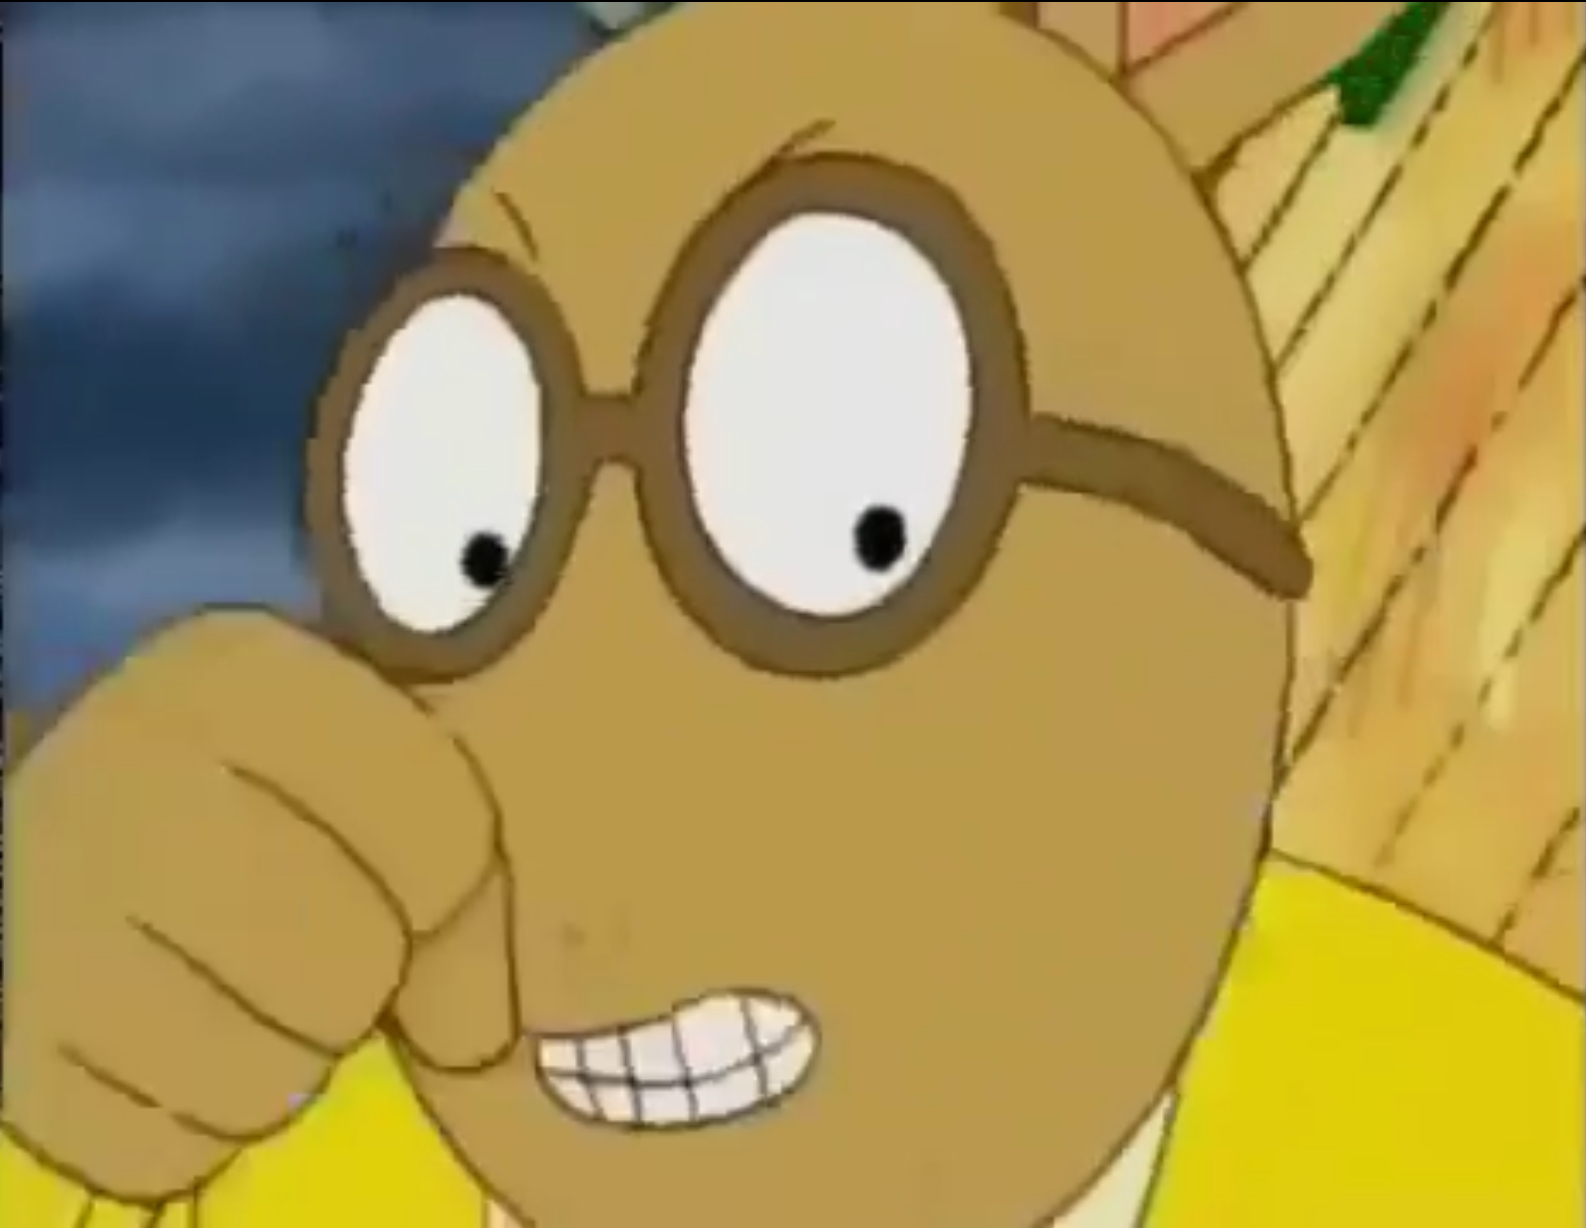 High Quality Arthur about to punch Blank Meme Template